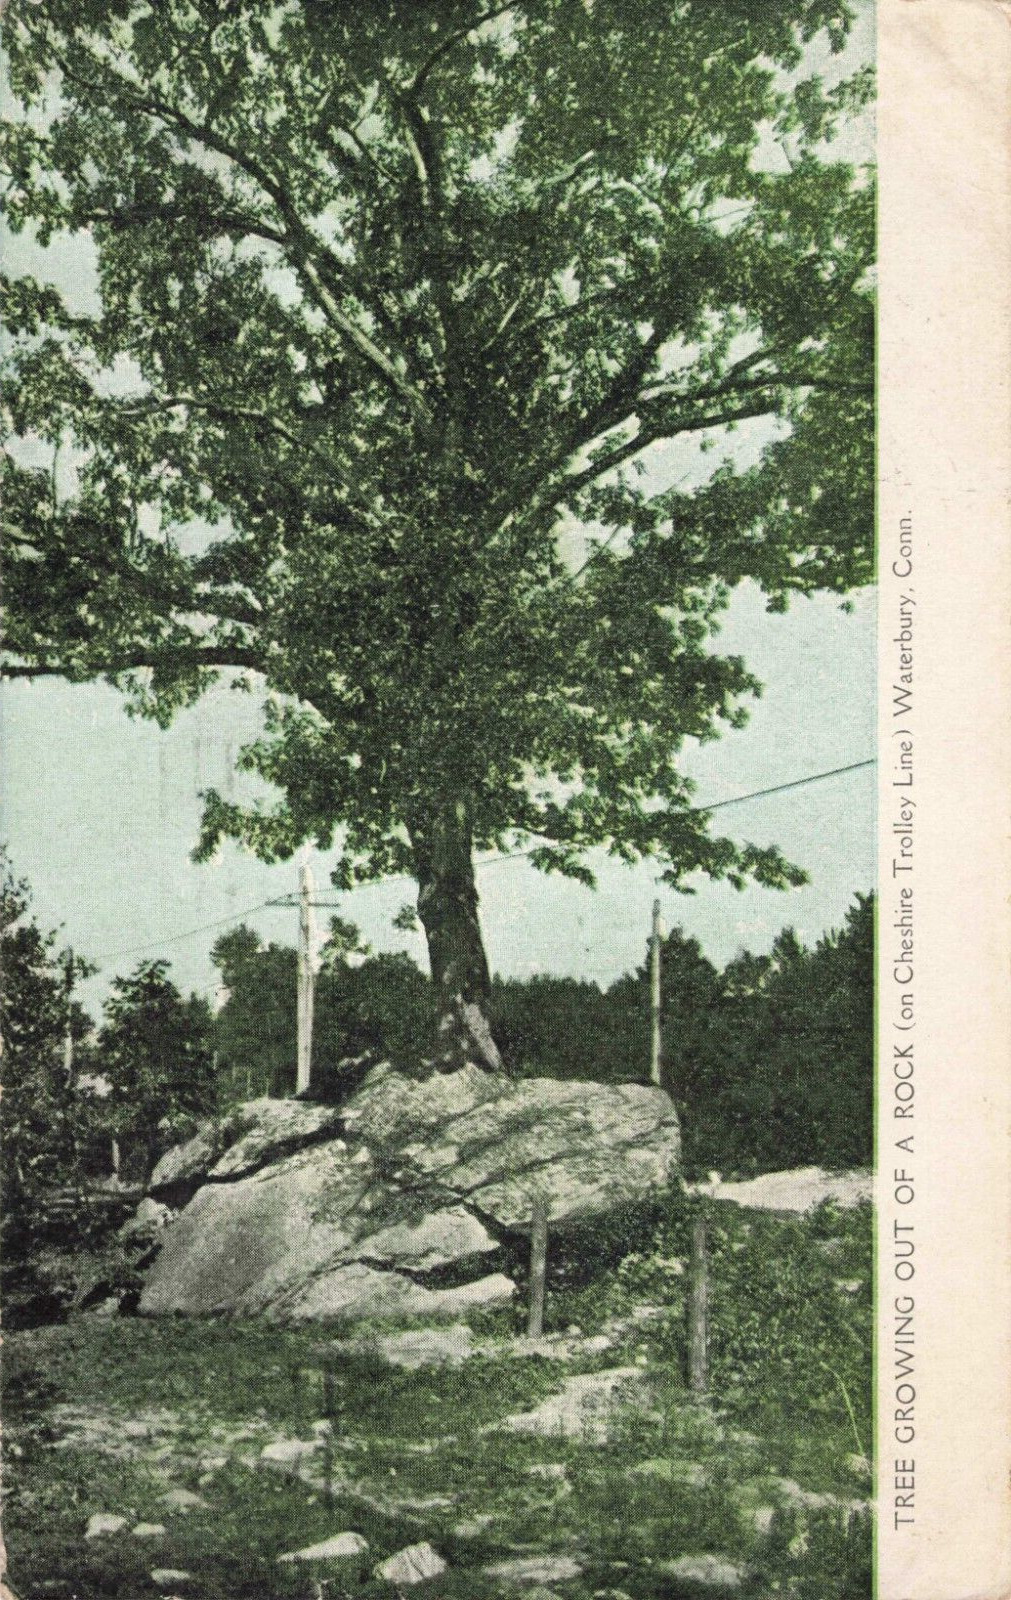 Waterbury CT Connecticut, Tree Growing out of a Rock, Vintage Postcard